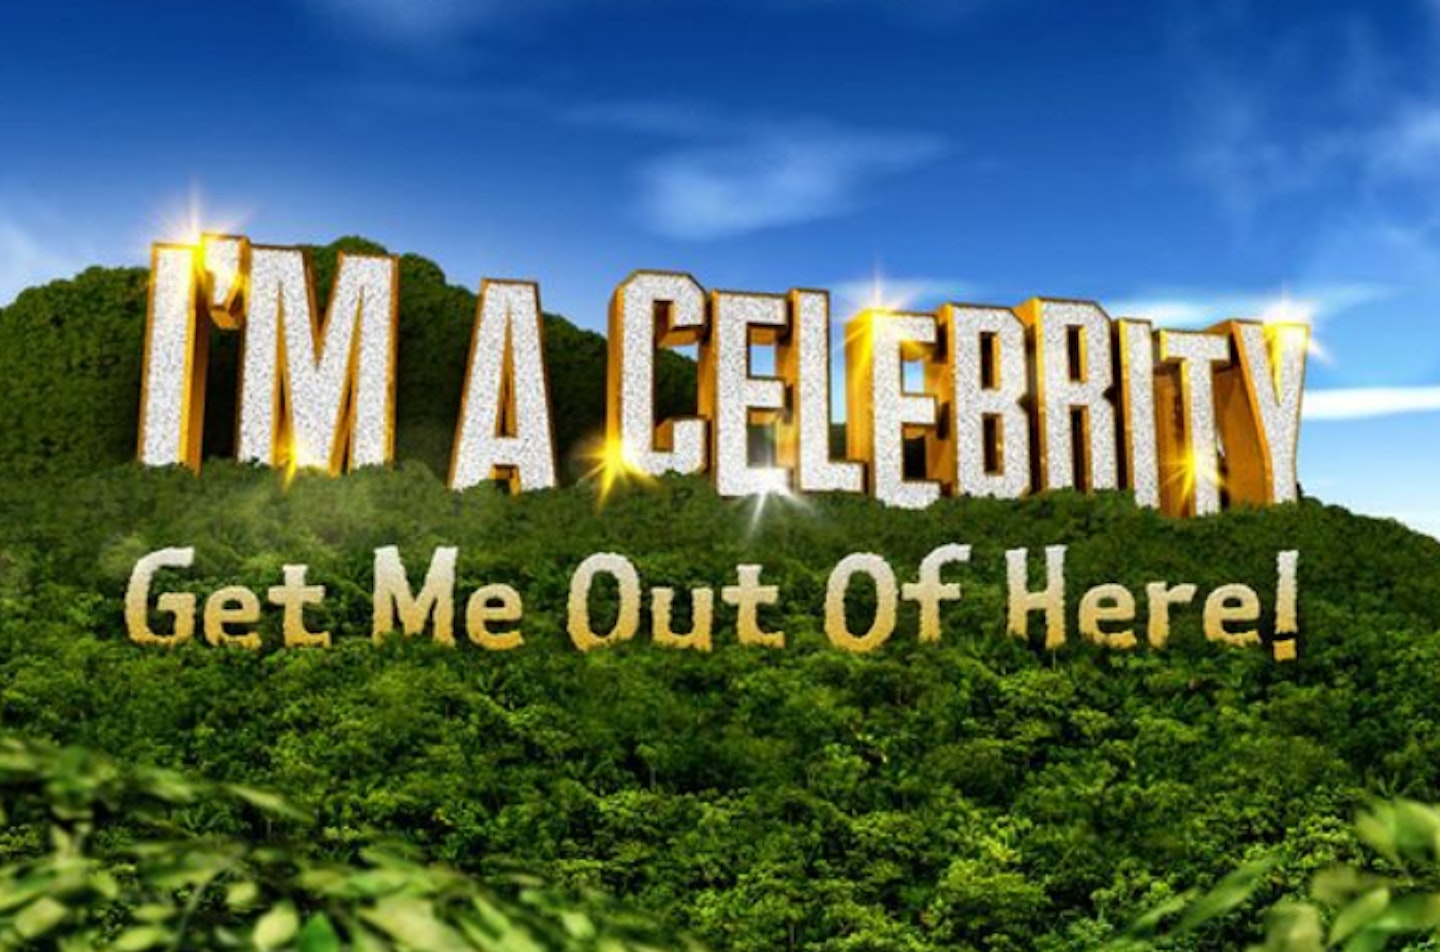 I'm A Celebrity Get Me Out Of Here 2018 logo